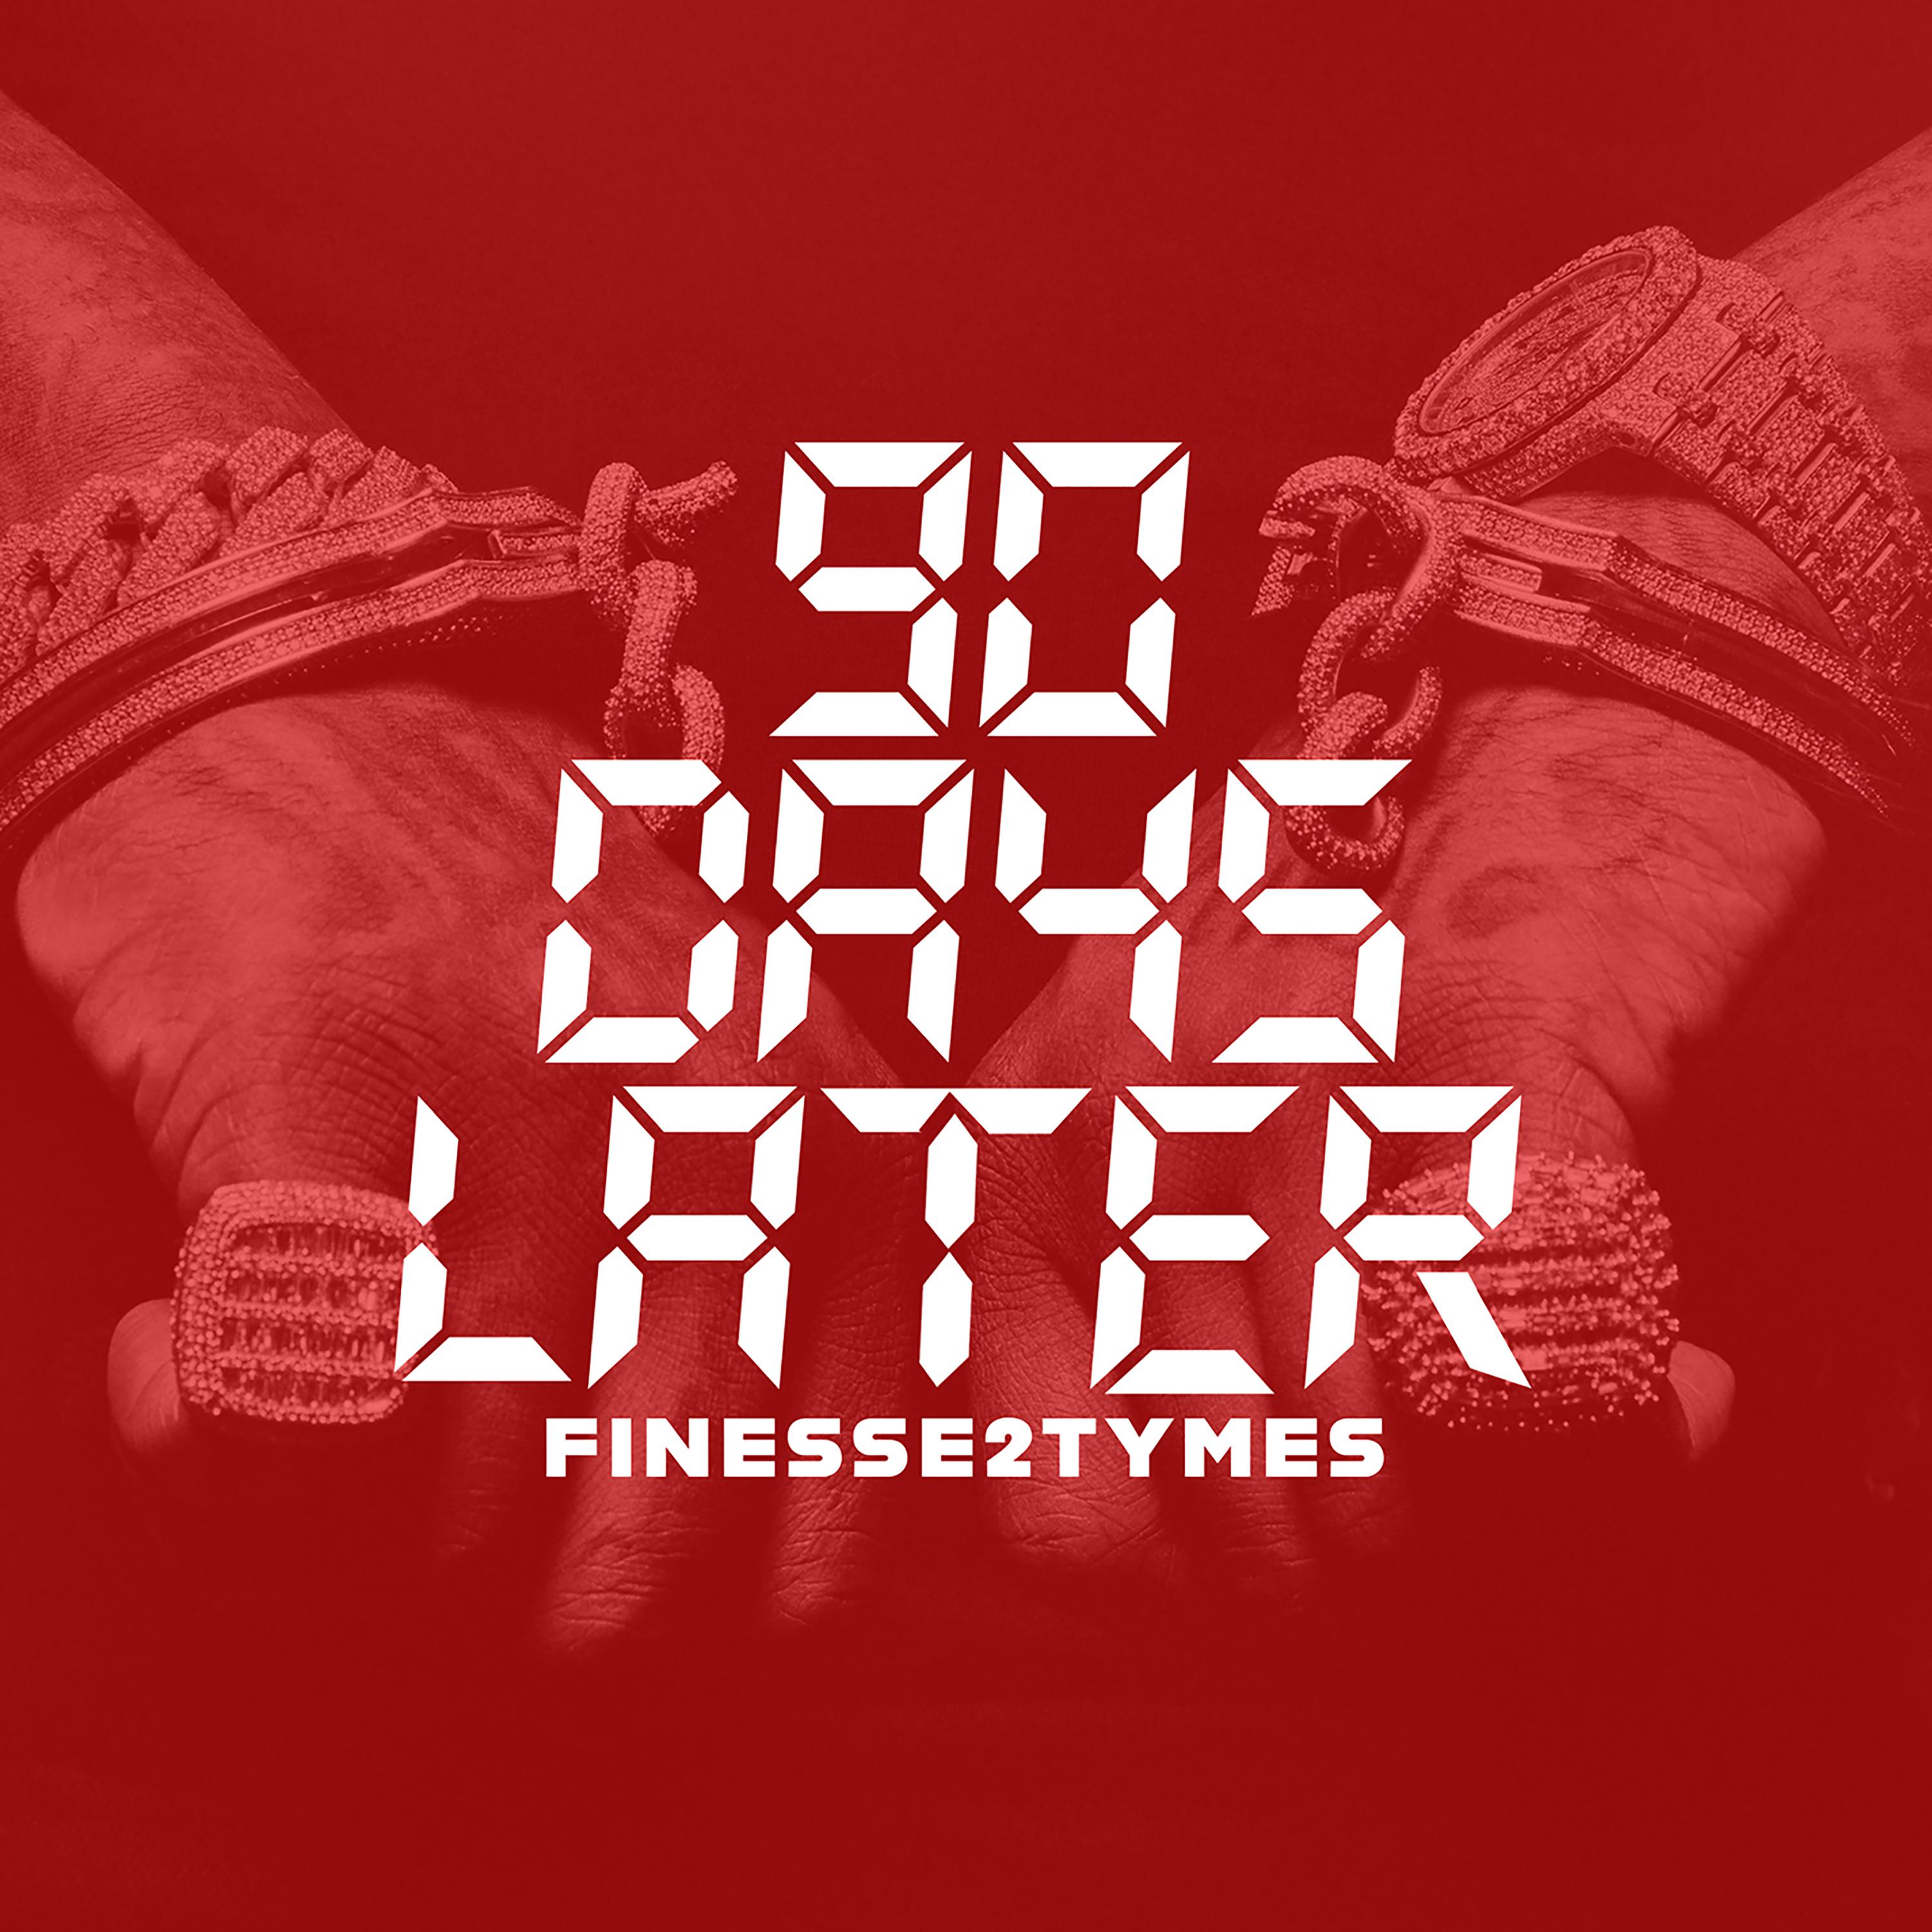 Finesse2tymes - Outside